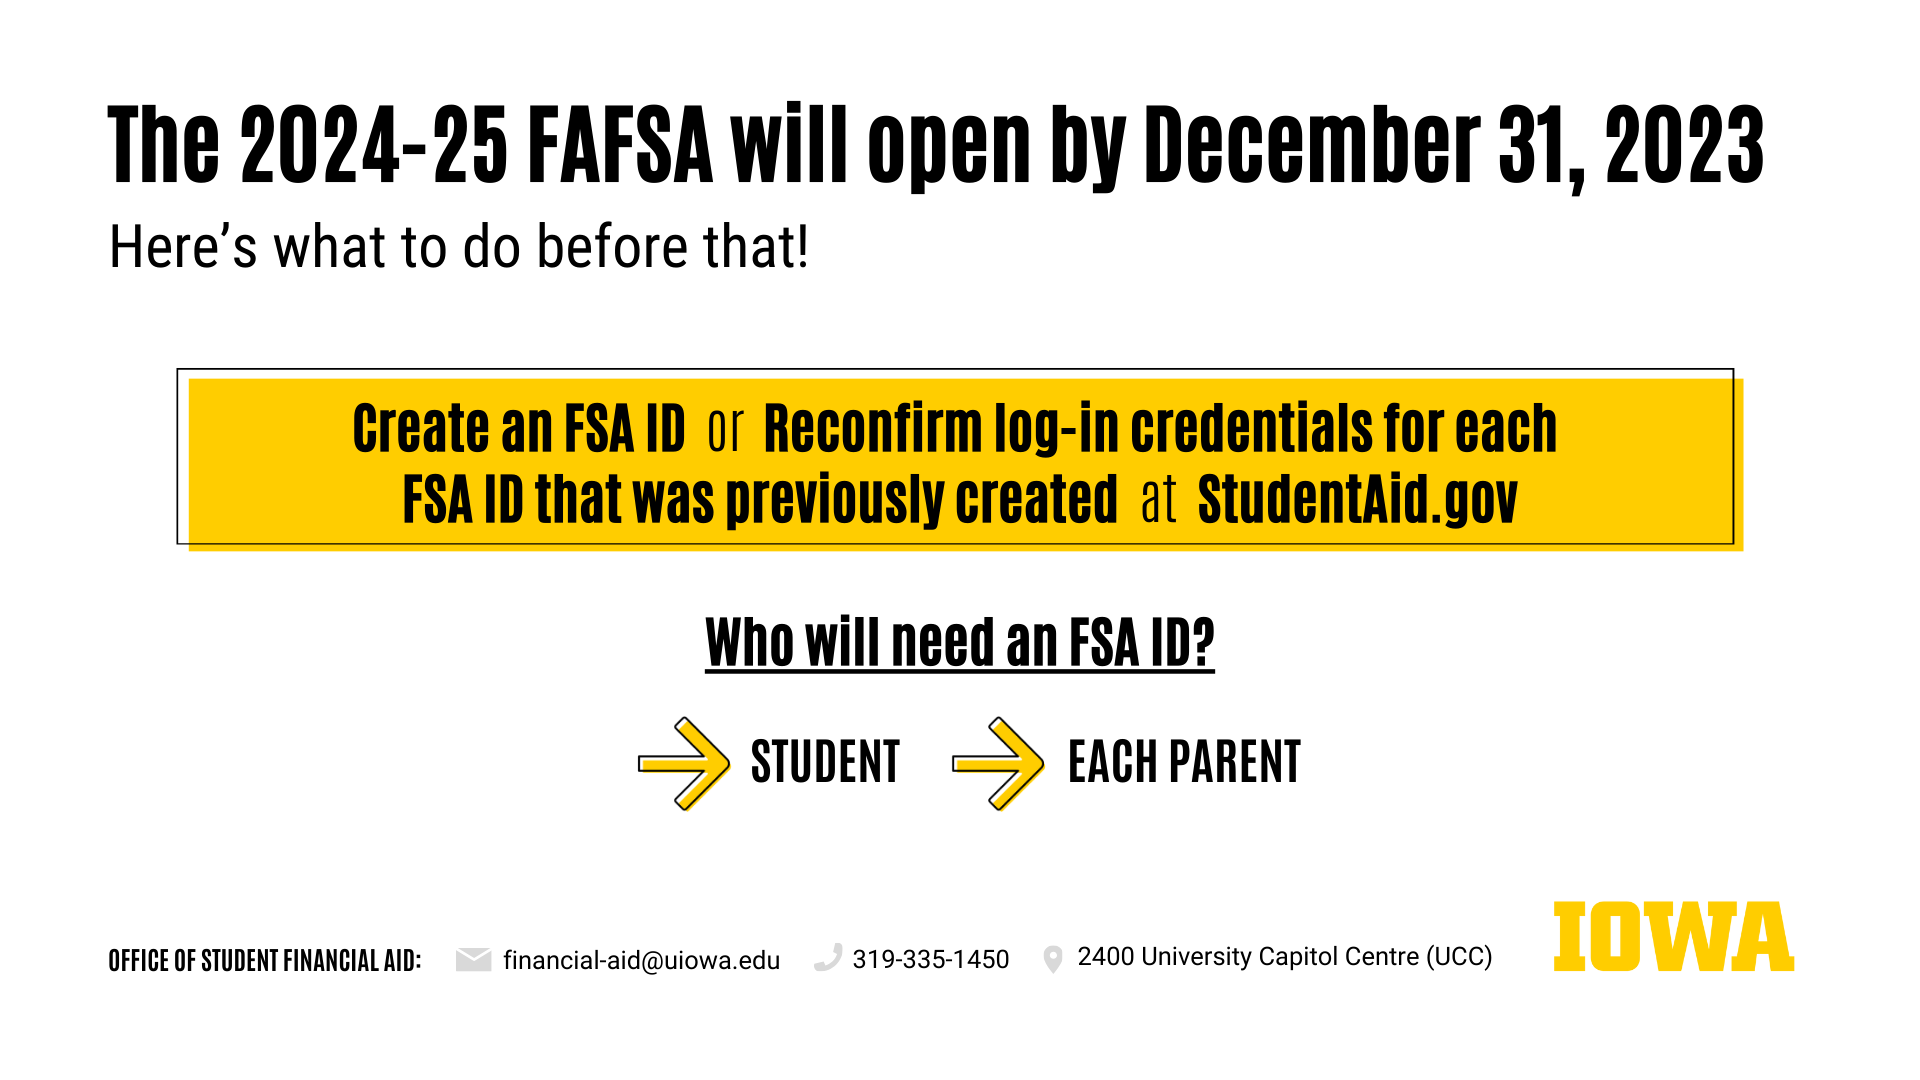 The 2024-25 FAFSA opens in December 2023. Here's what to do before that! Create or reconfirm your FSA ID. Who will need an FSA ID? Student and each parent.